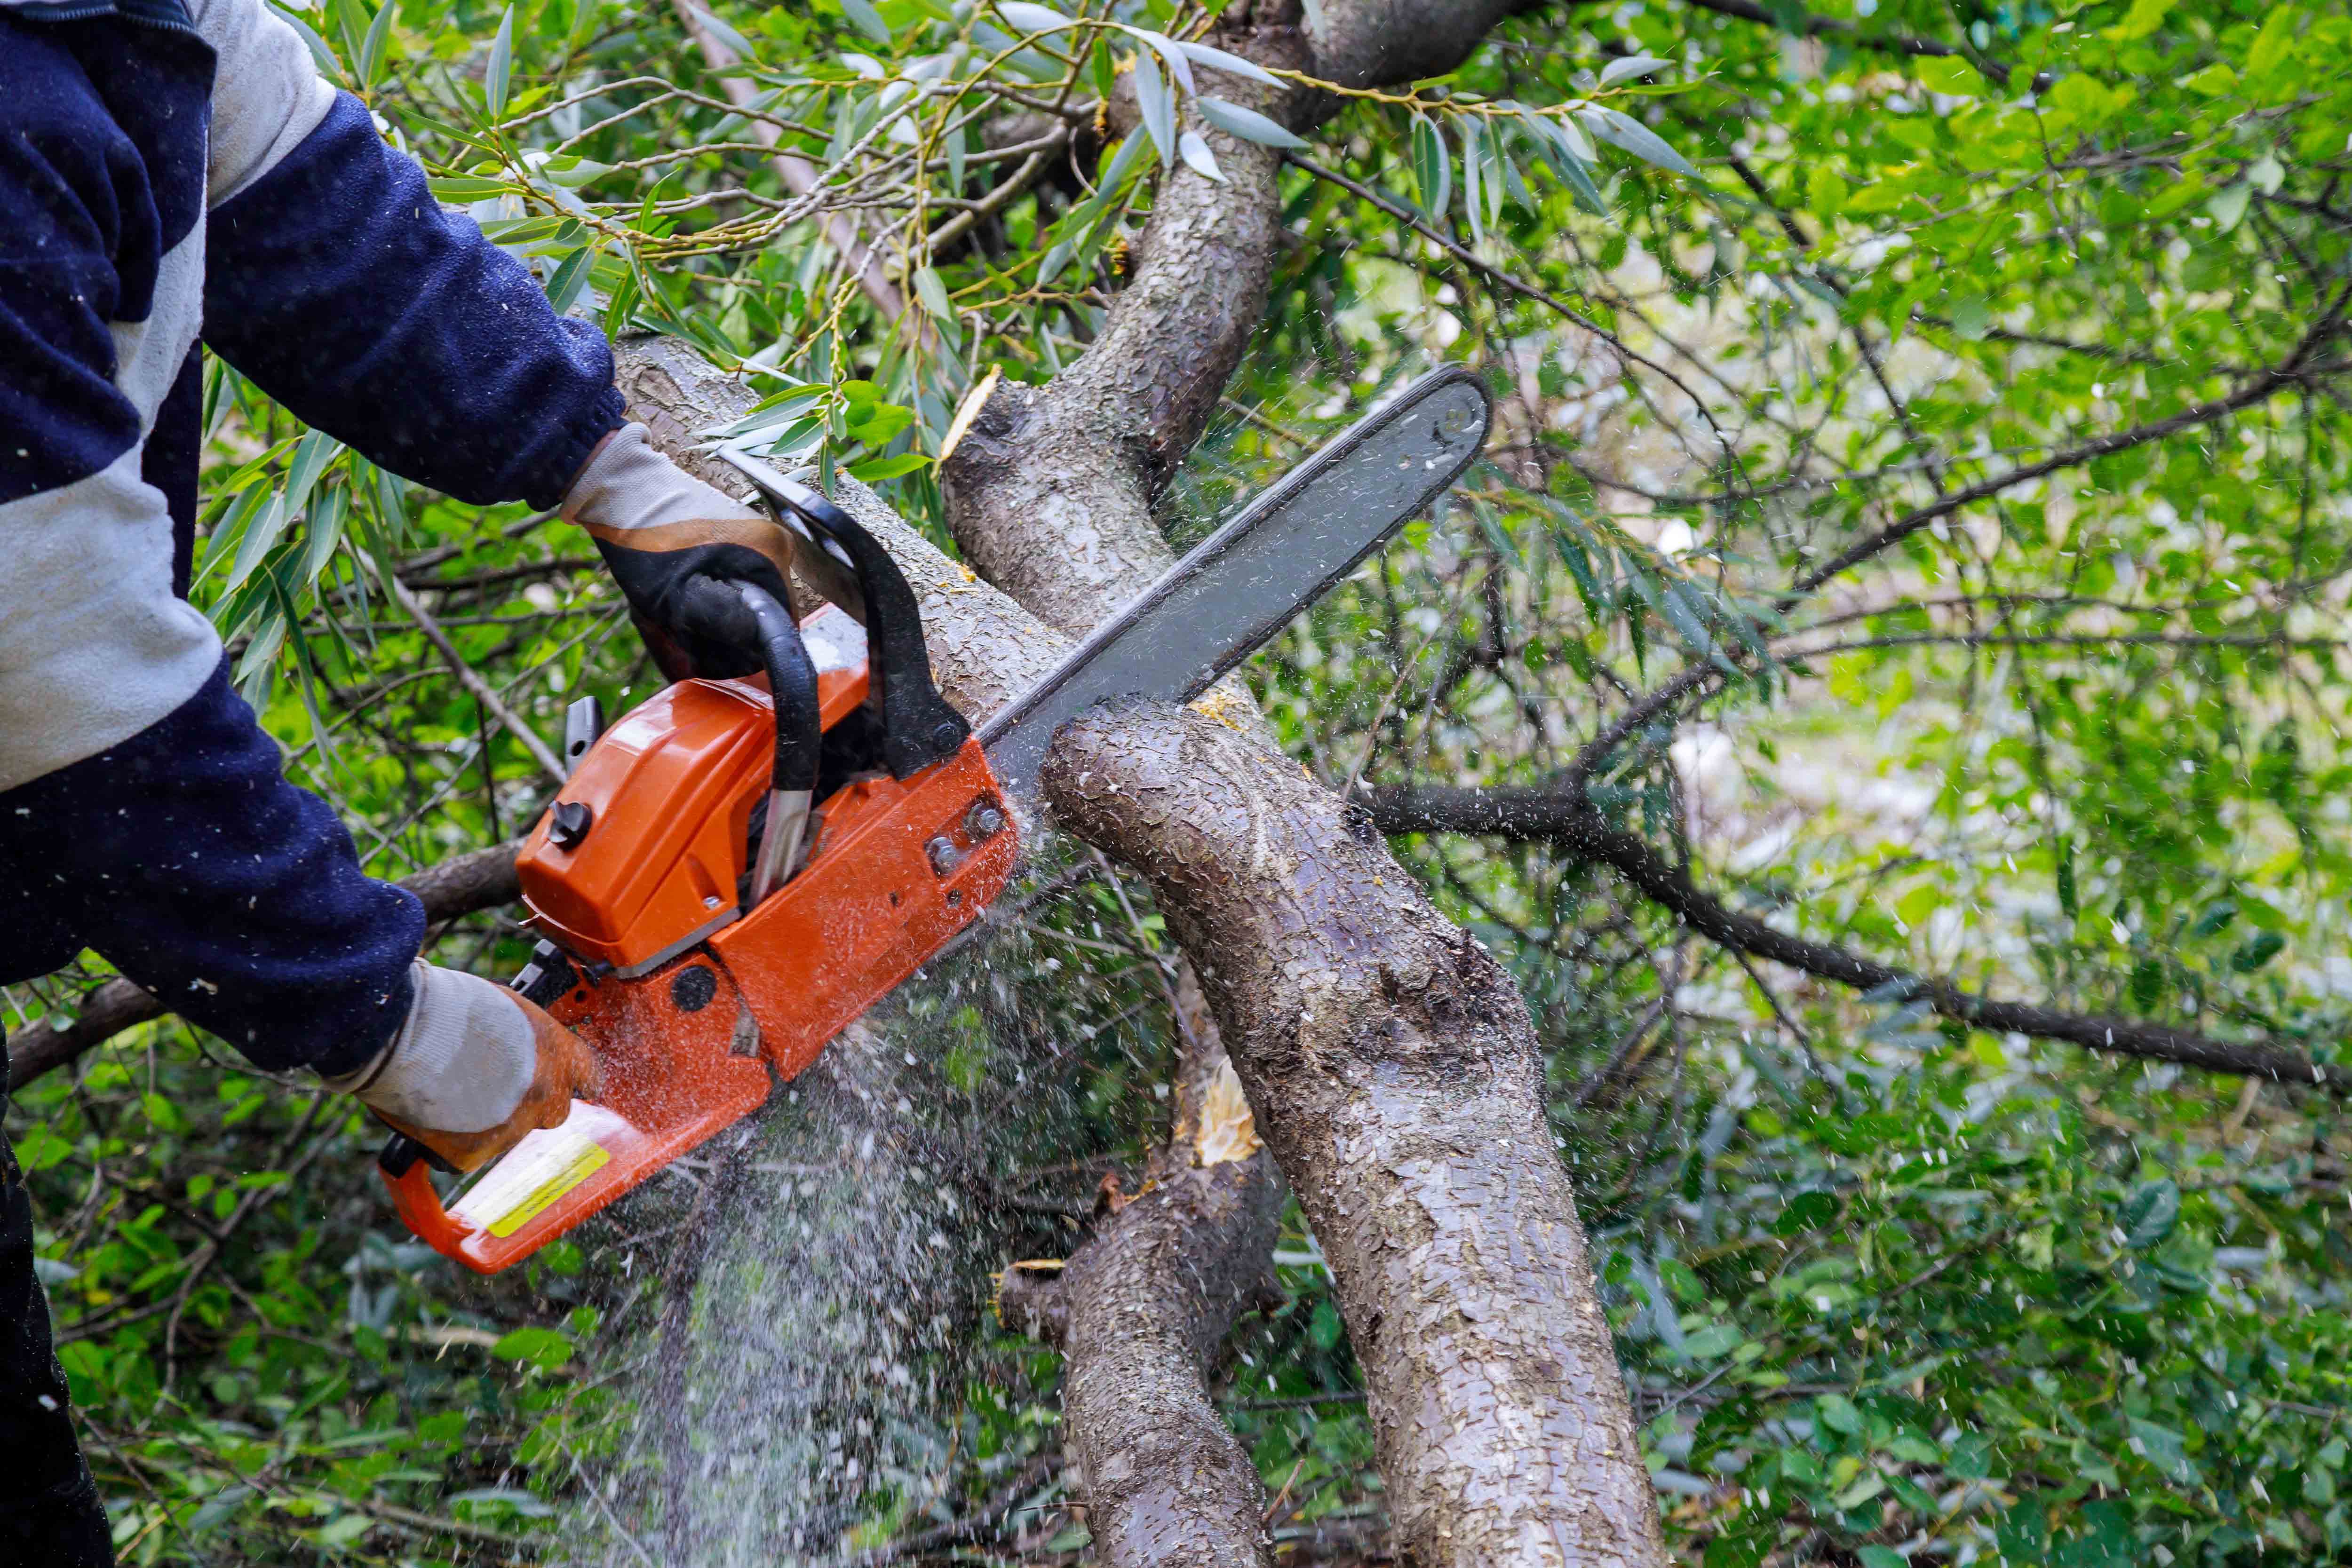 Tree Trimming & Removal